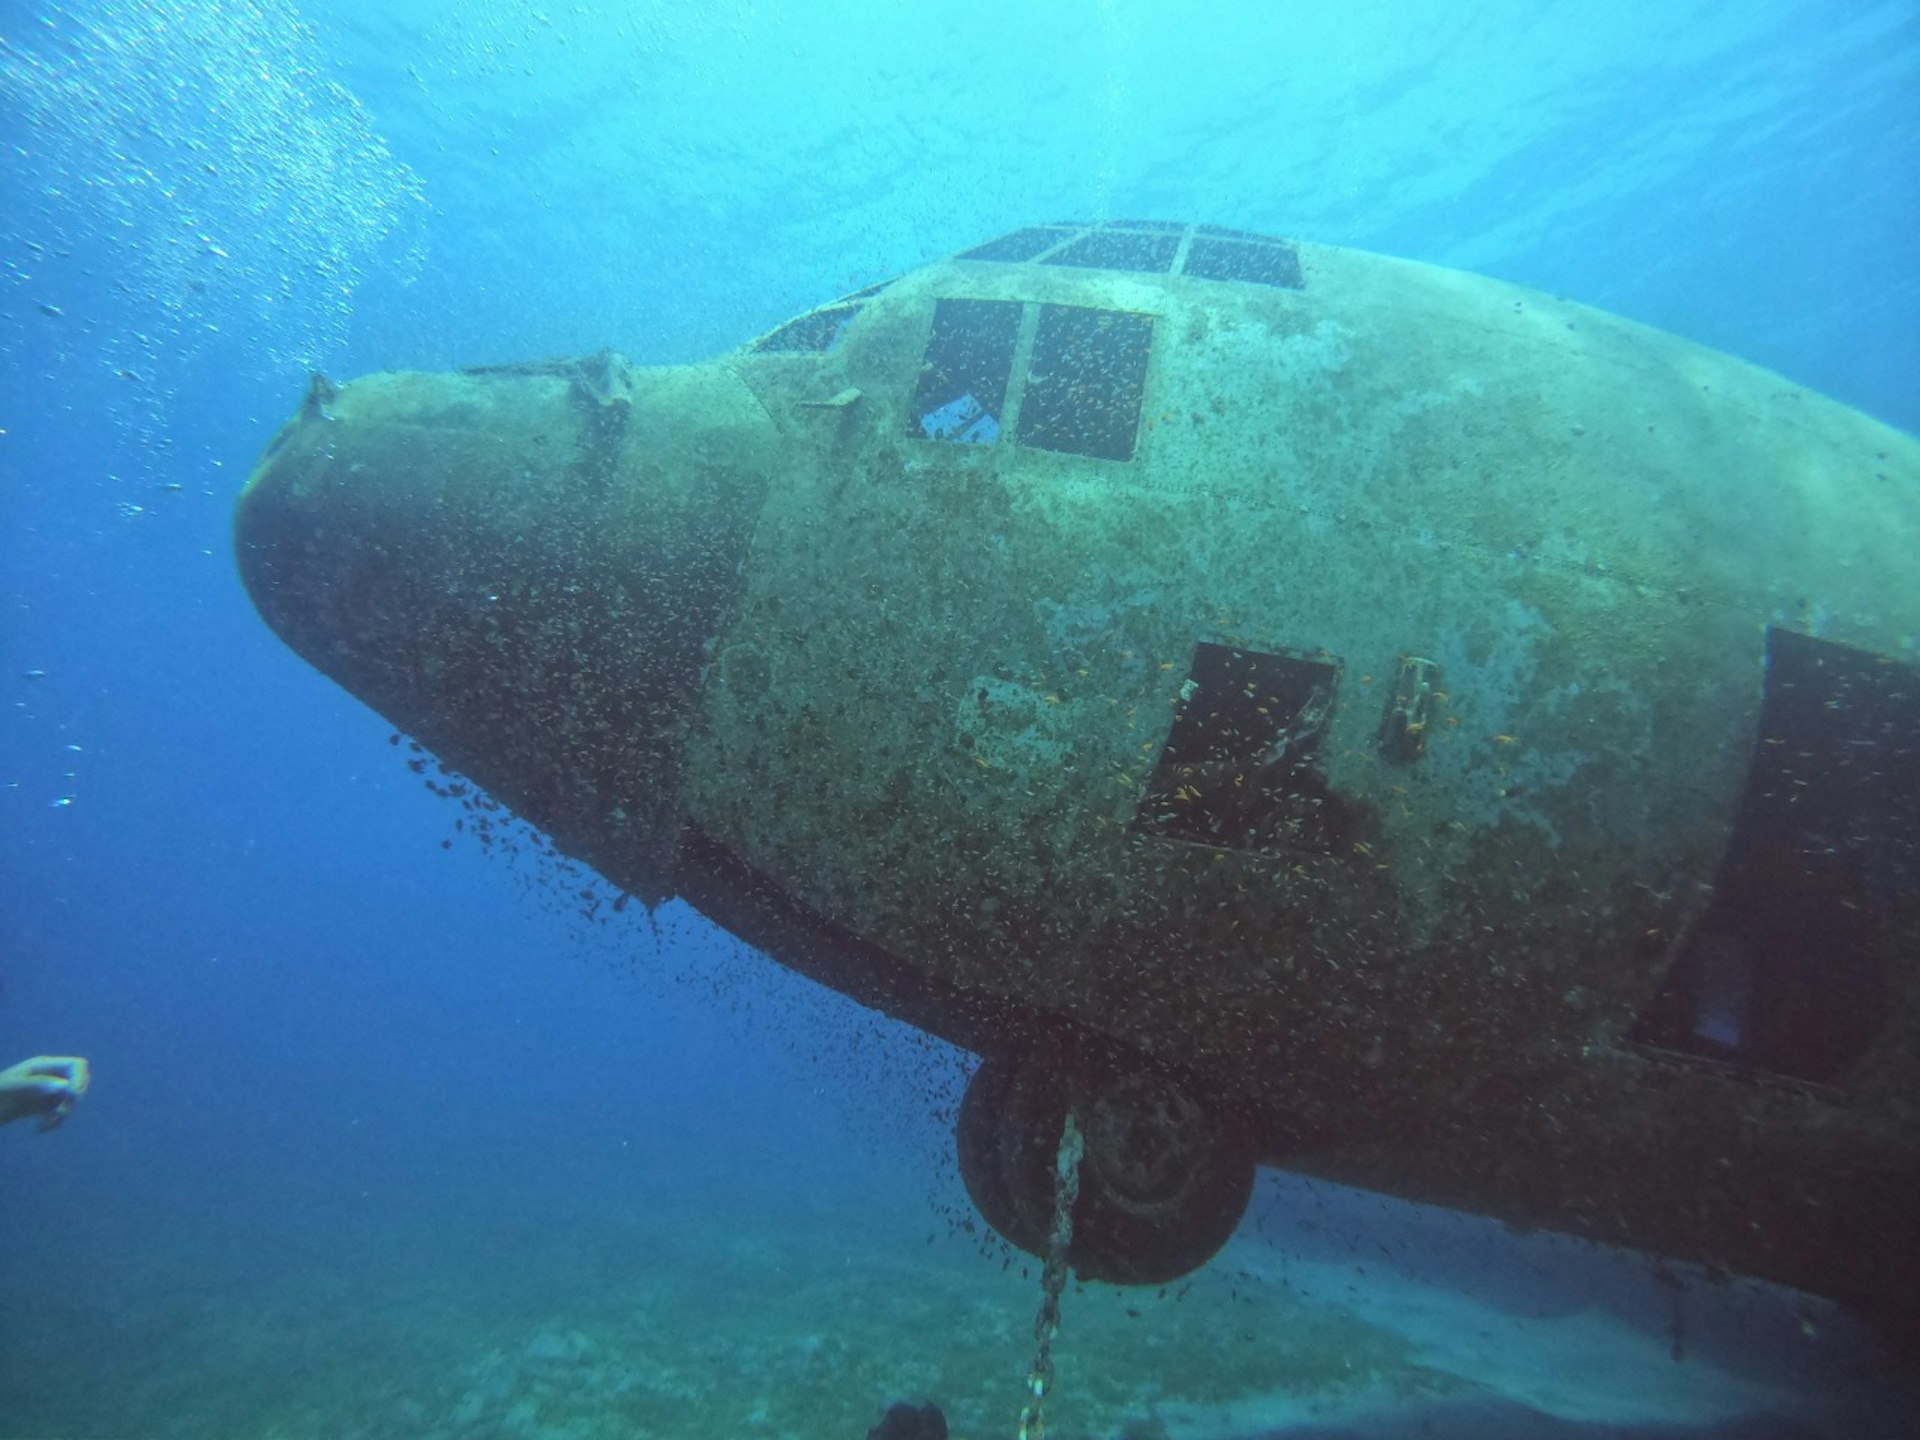 A wreck of a plane underwater.